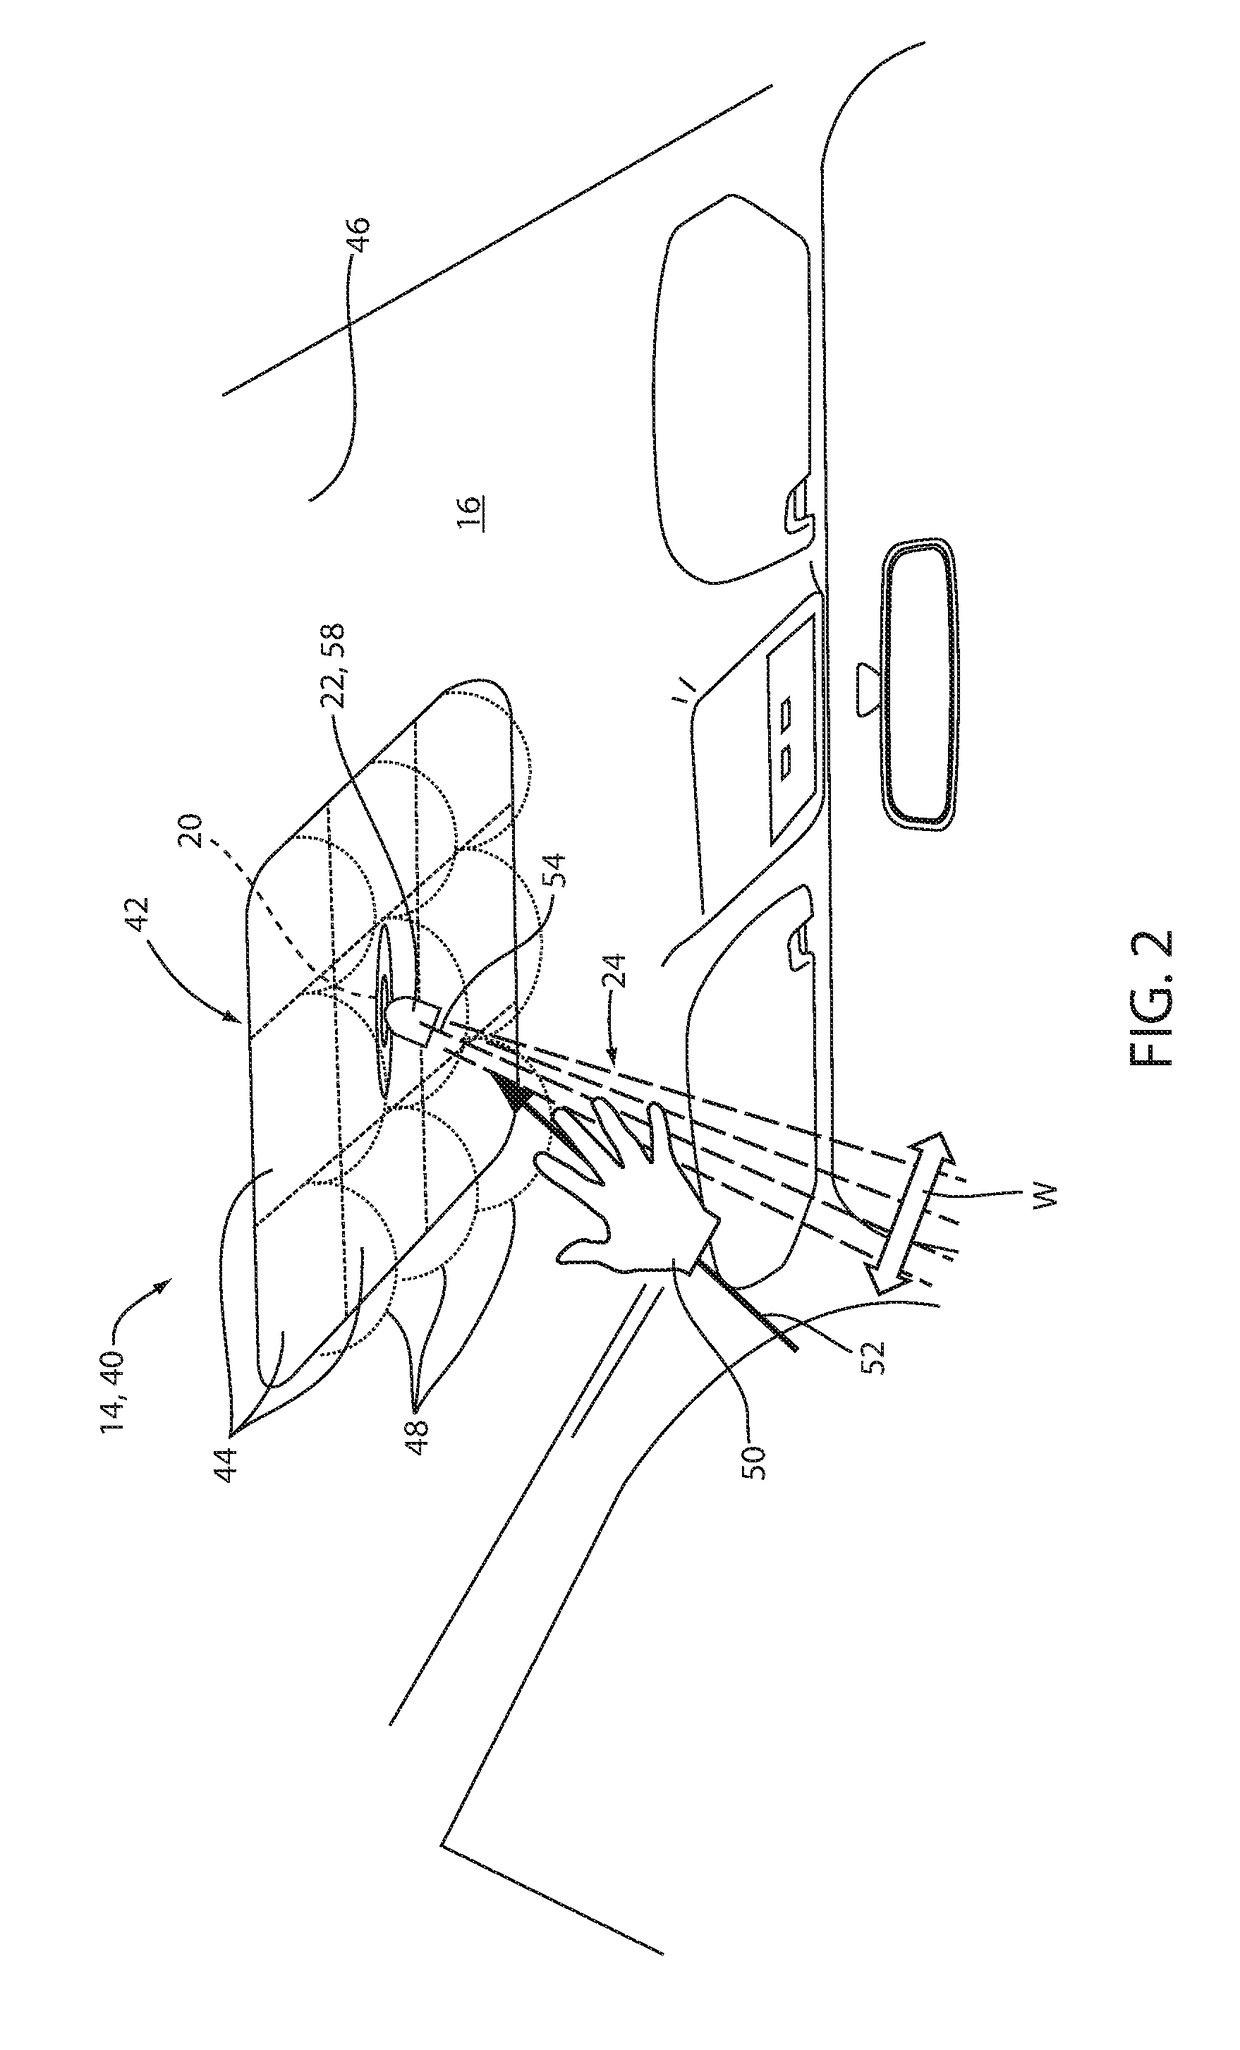 Vehicle lighting system with directional control